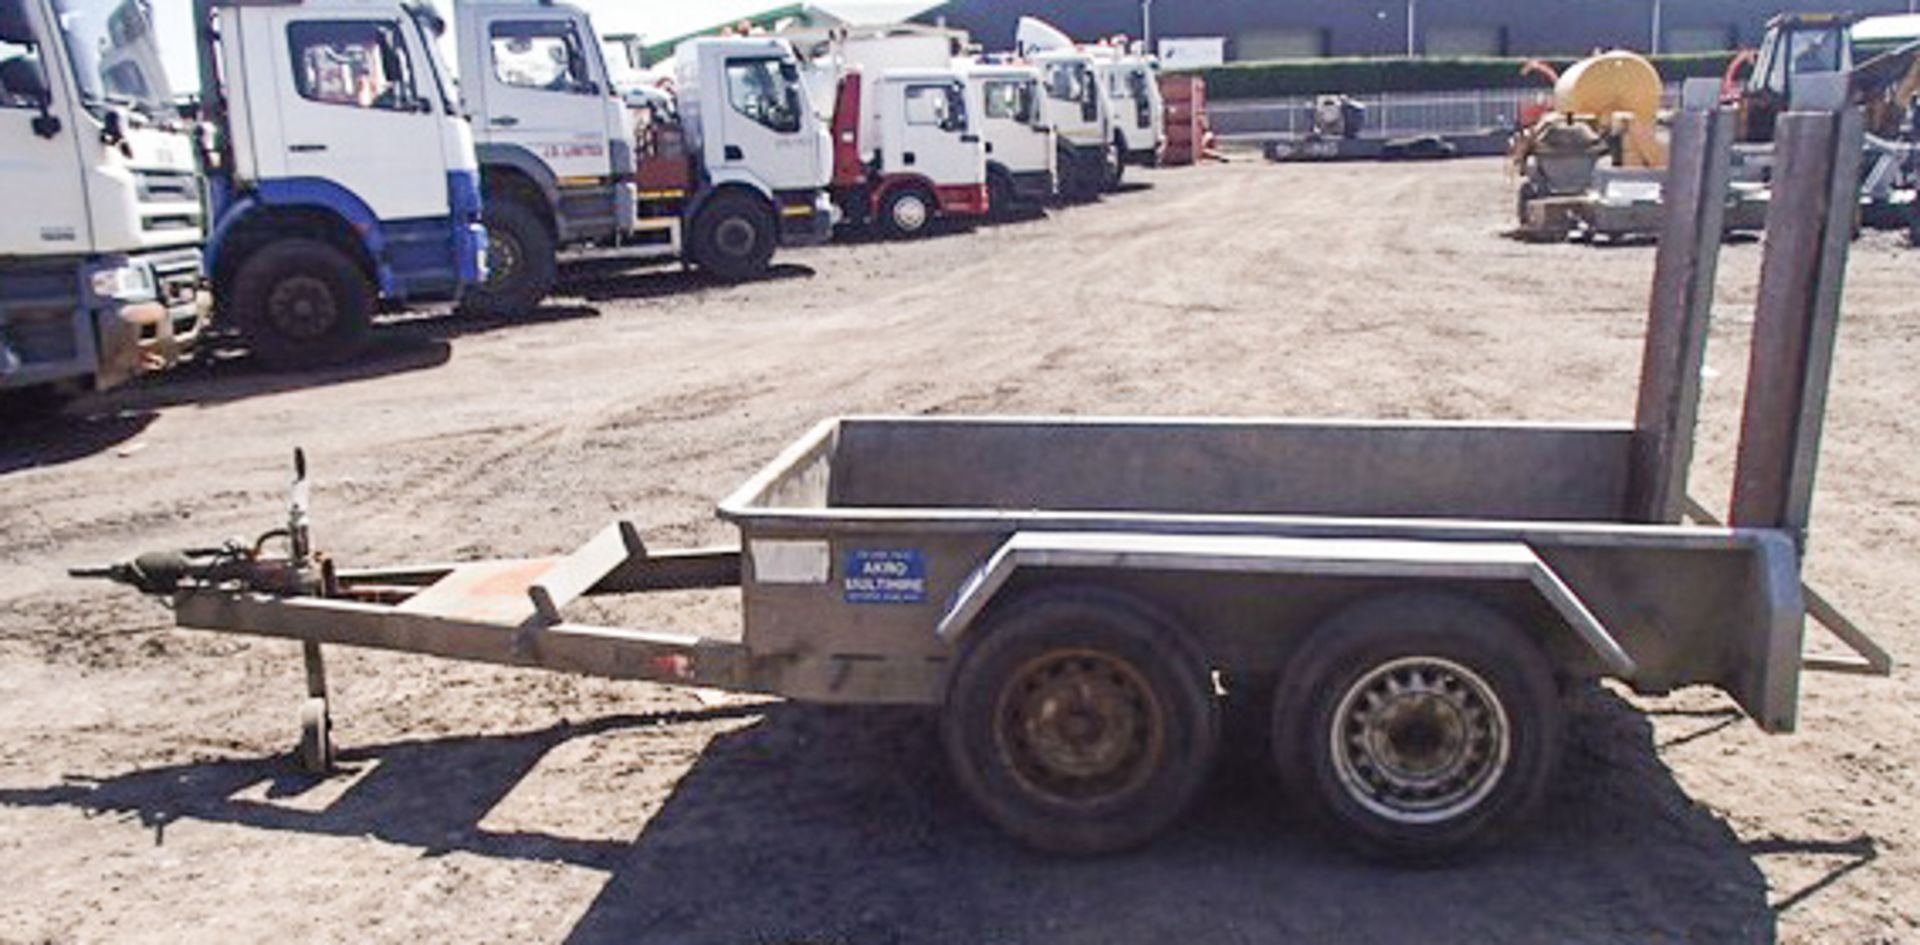 2000 TAYLOR 2.6T PLANT TRAILER, S/N ME346 - Image 4 of 6